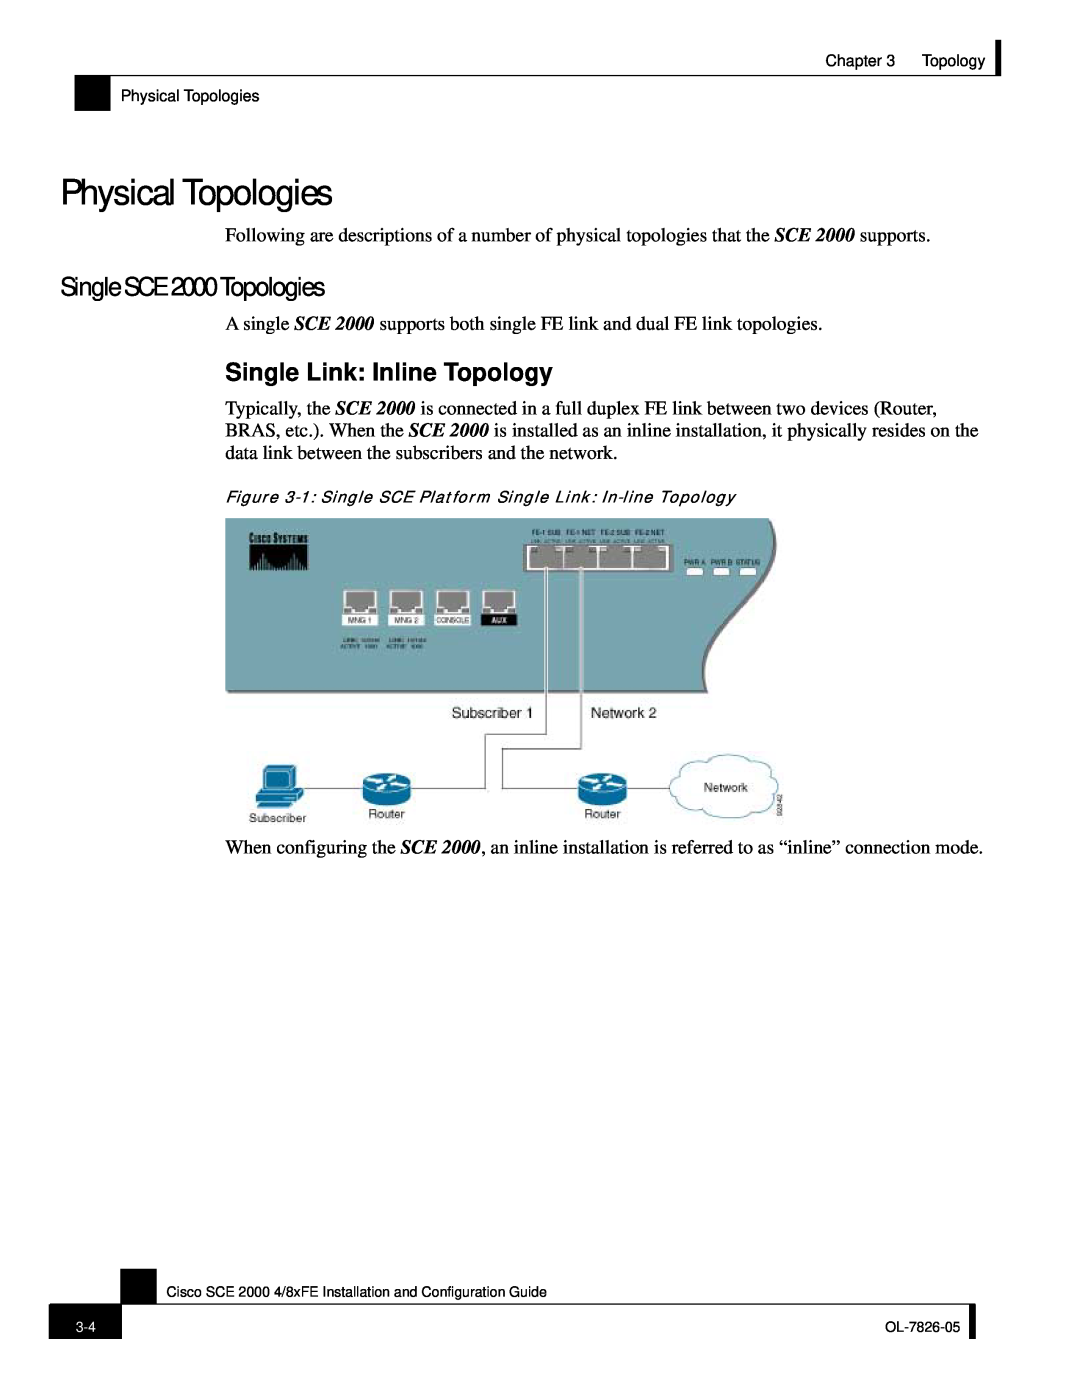 Cisco Systems SCE 2000 4/8xFE manual Physical Topologies, Single SCE 2000 Topologies, Single Link Inline Topology 